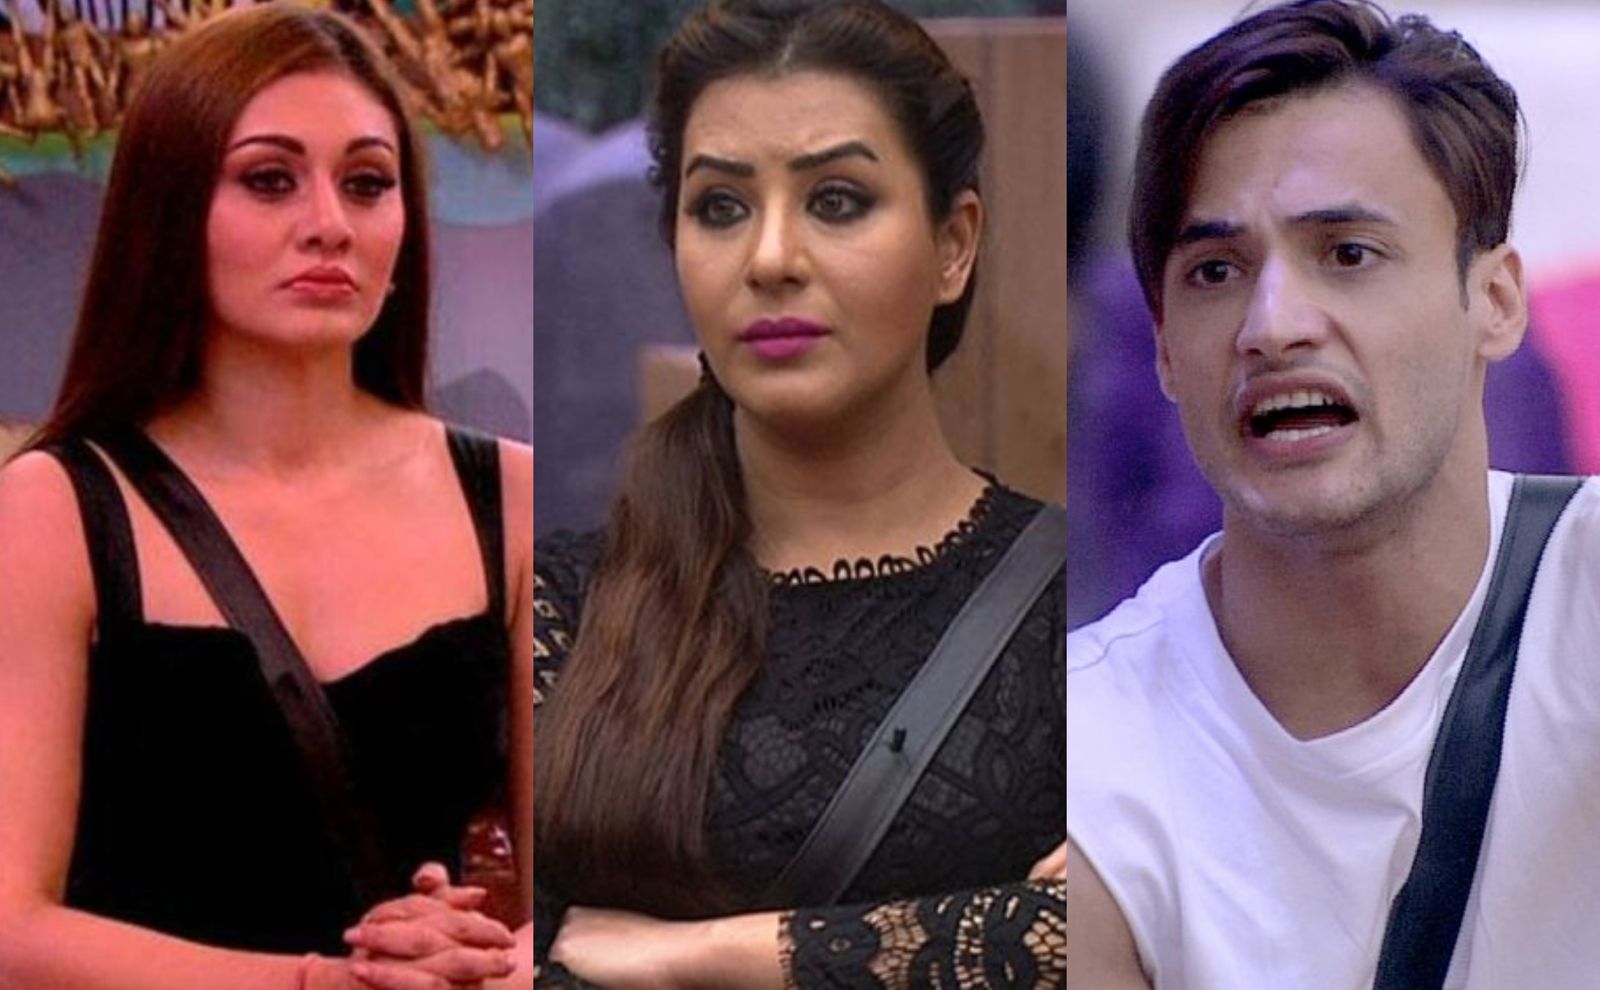 Bigg Boss 13: Season 11 Winner Shilpa Shinde Lashes Out At Shefali Jariwala For Her Negative Comments On Asim Riaz